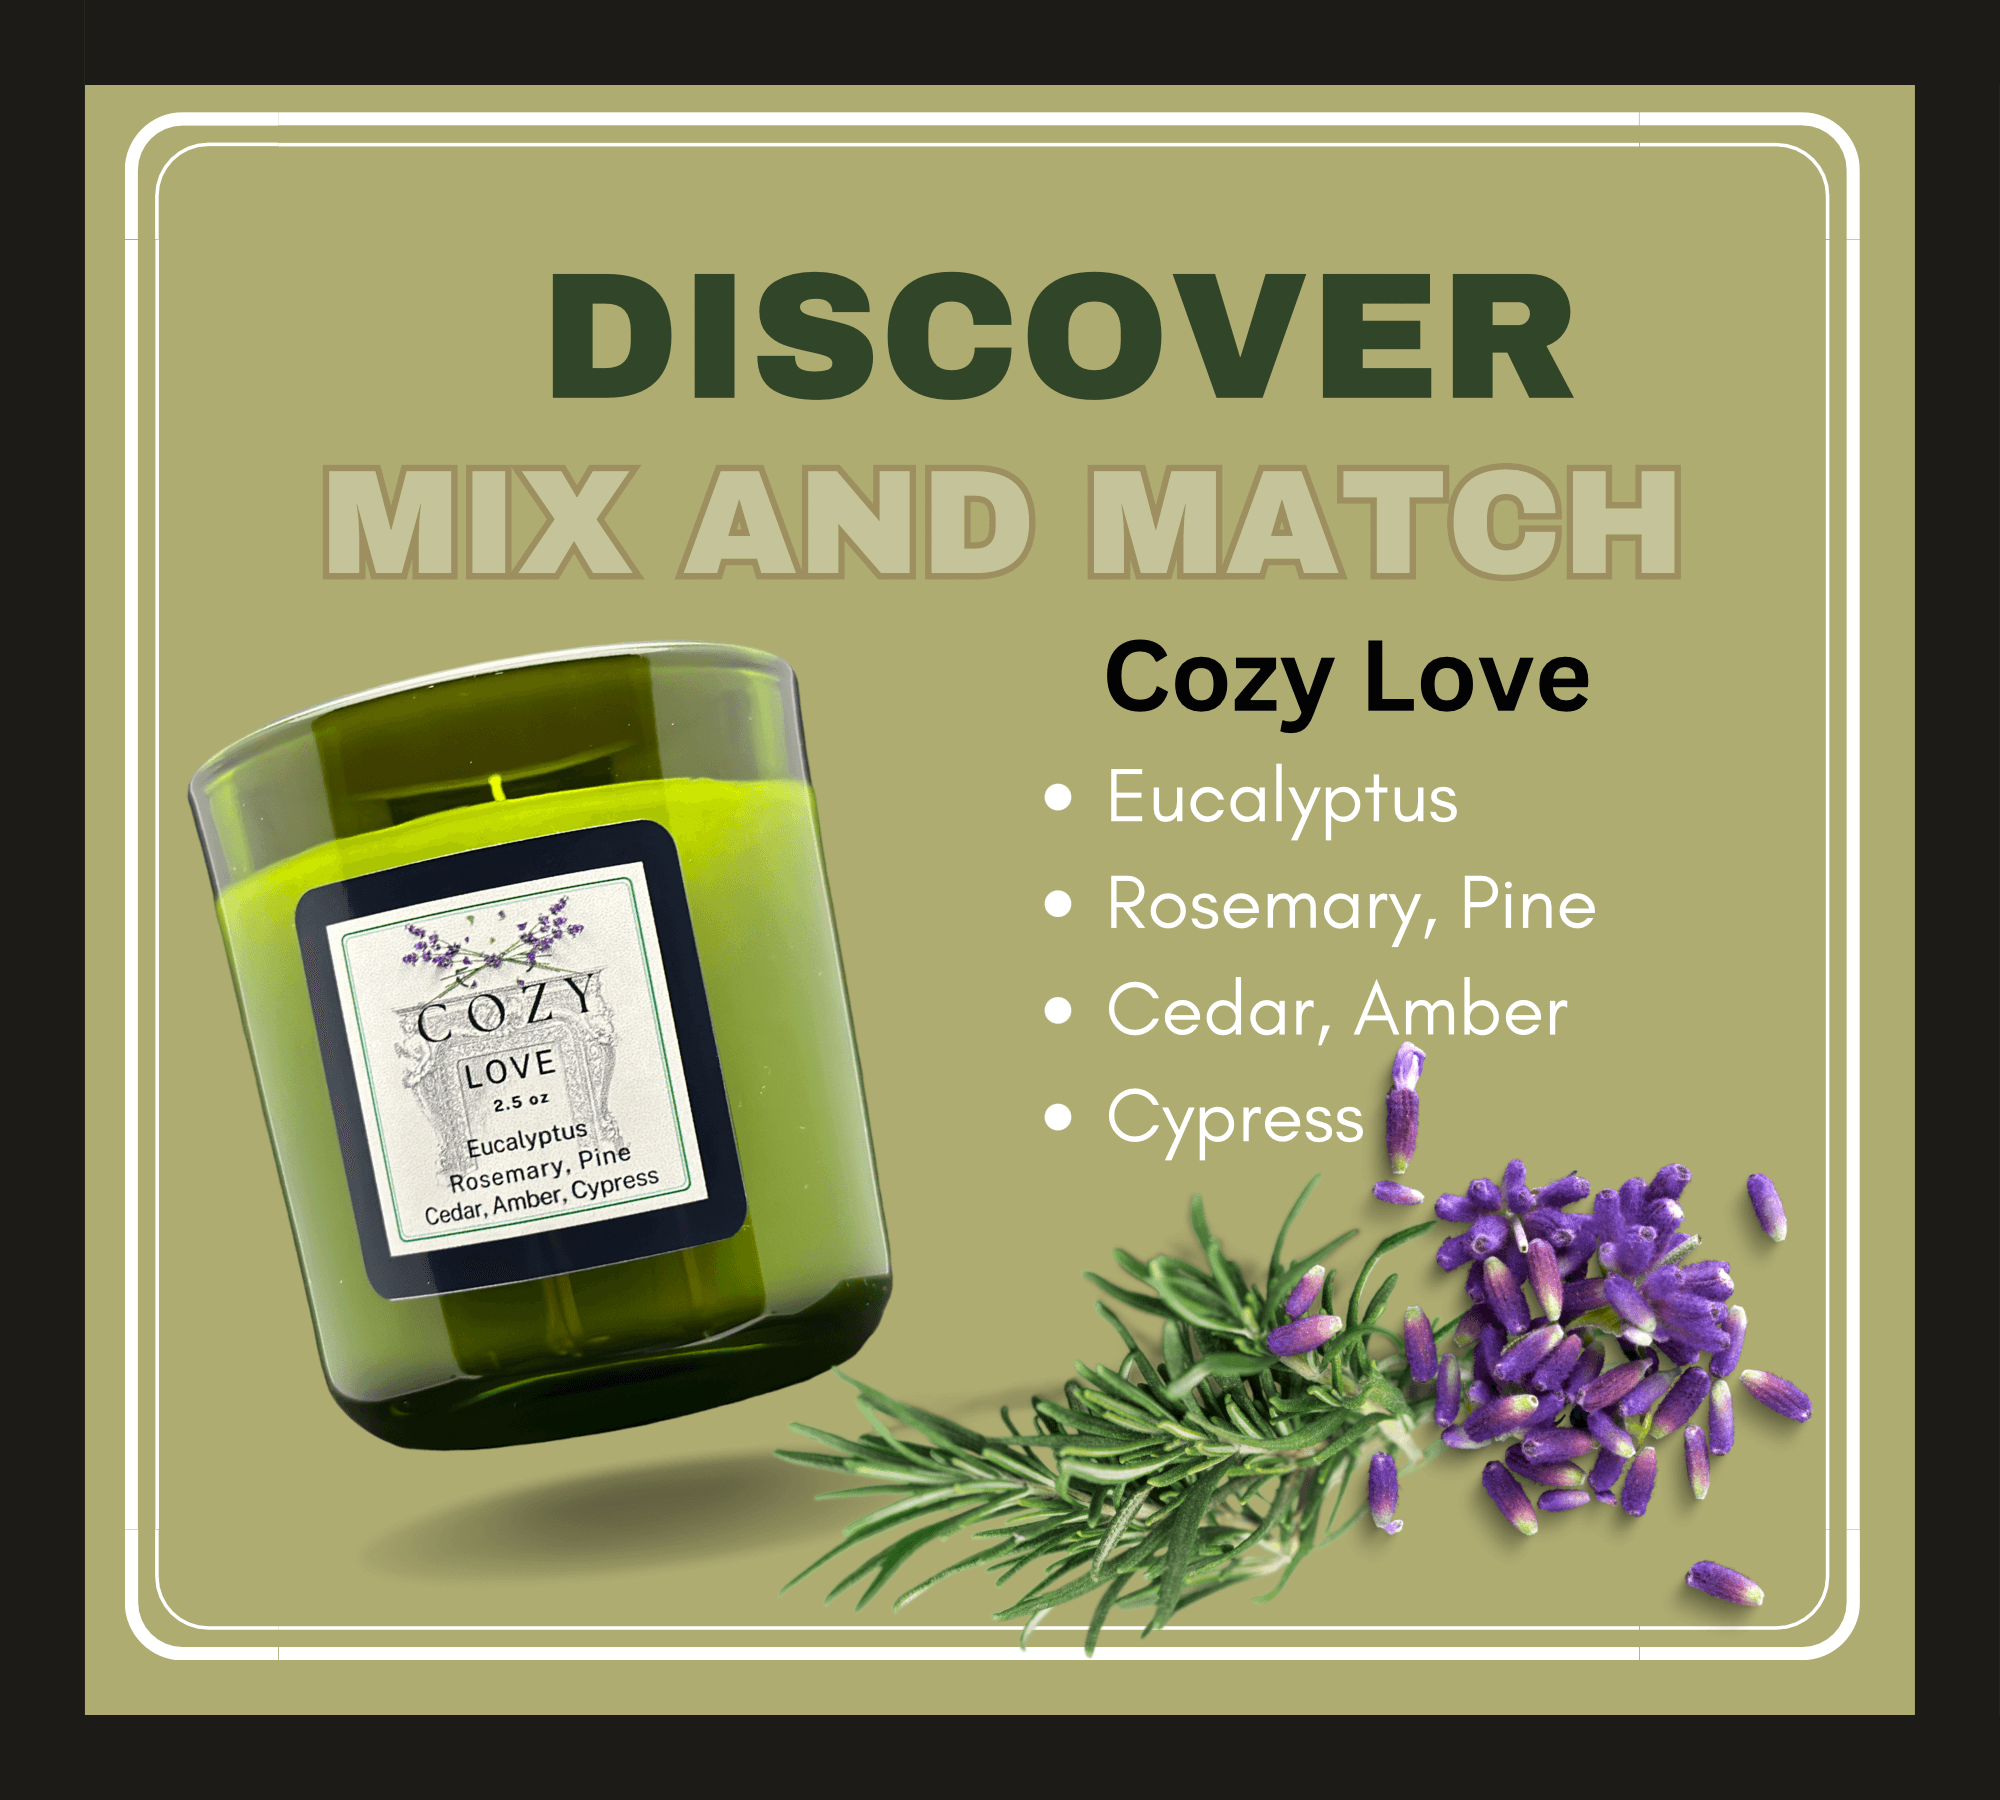 Cozy Love candle. Rosemary and lavender. Fragrance discovery set.